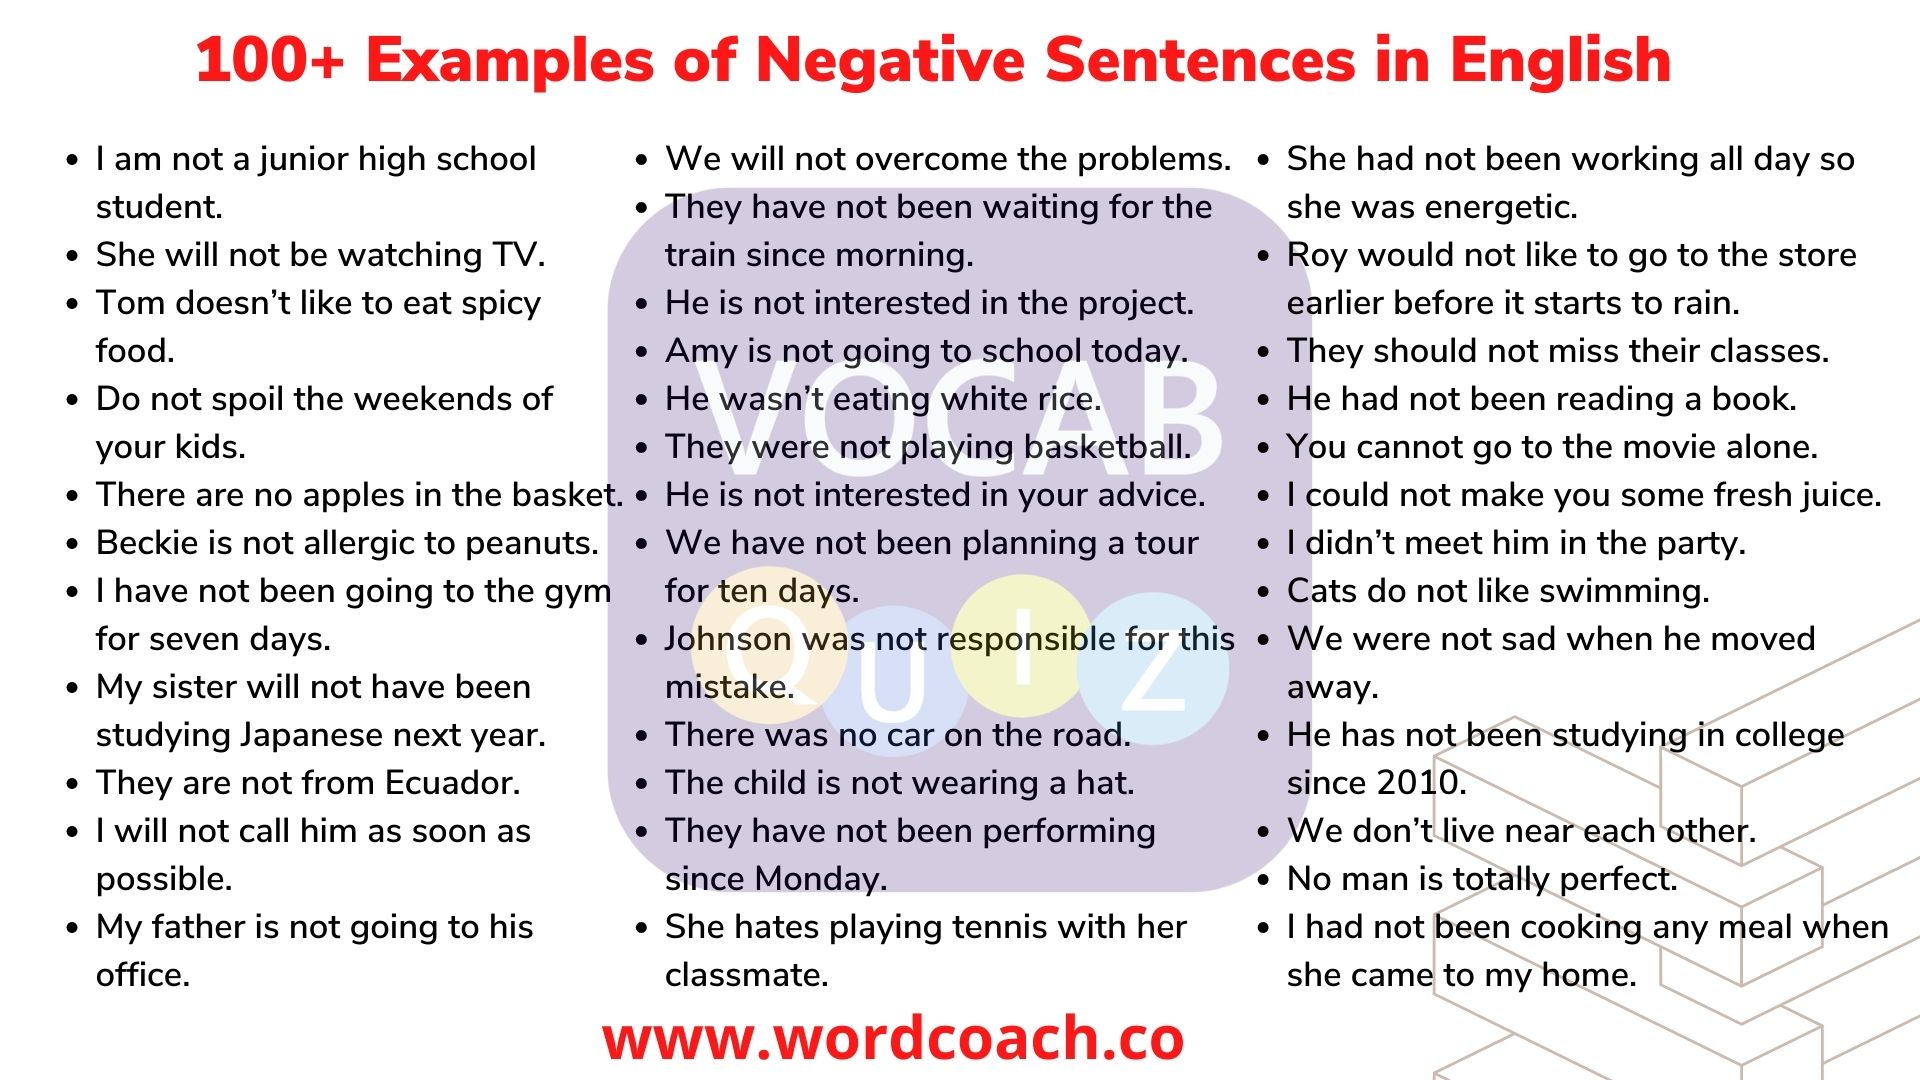 100+ Examples of Negative Sentences in English - wordcoach.co